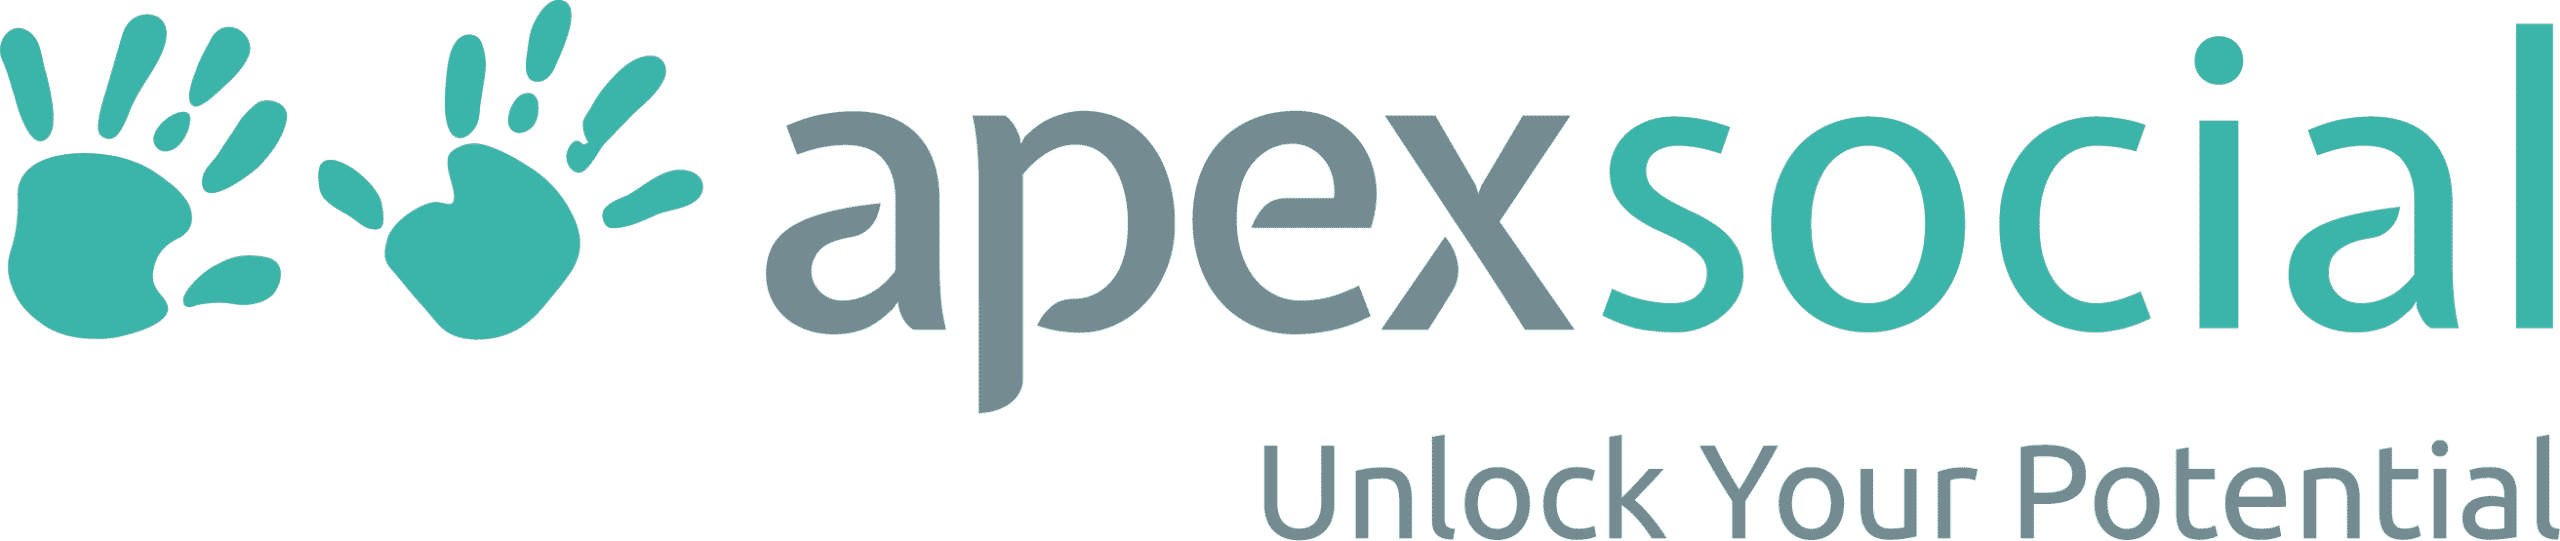 Apex Social Unlock Your Potential Logo with Hands